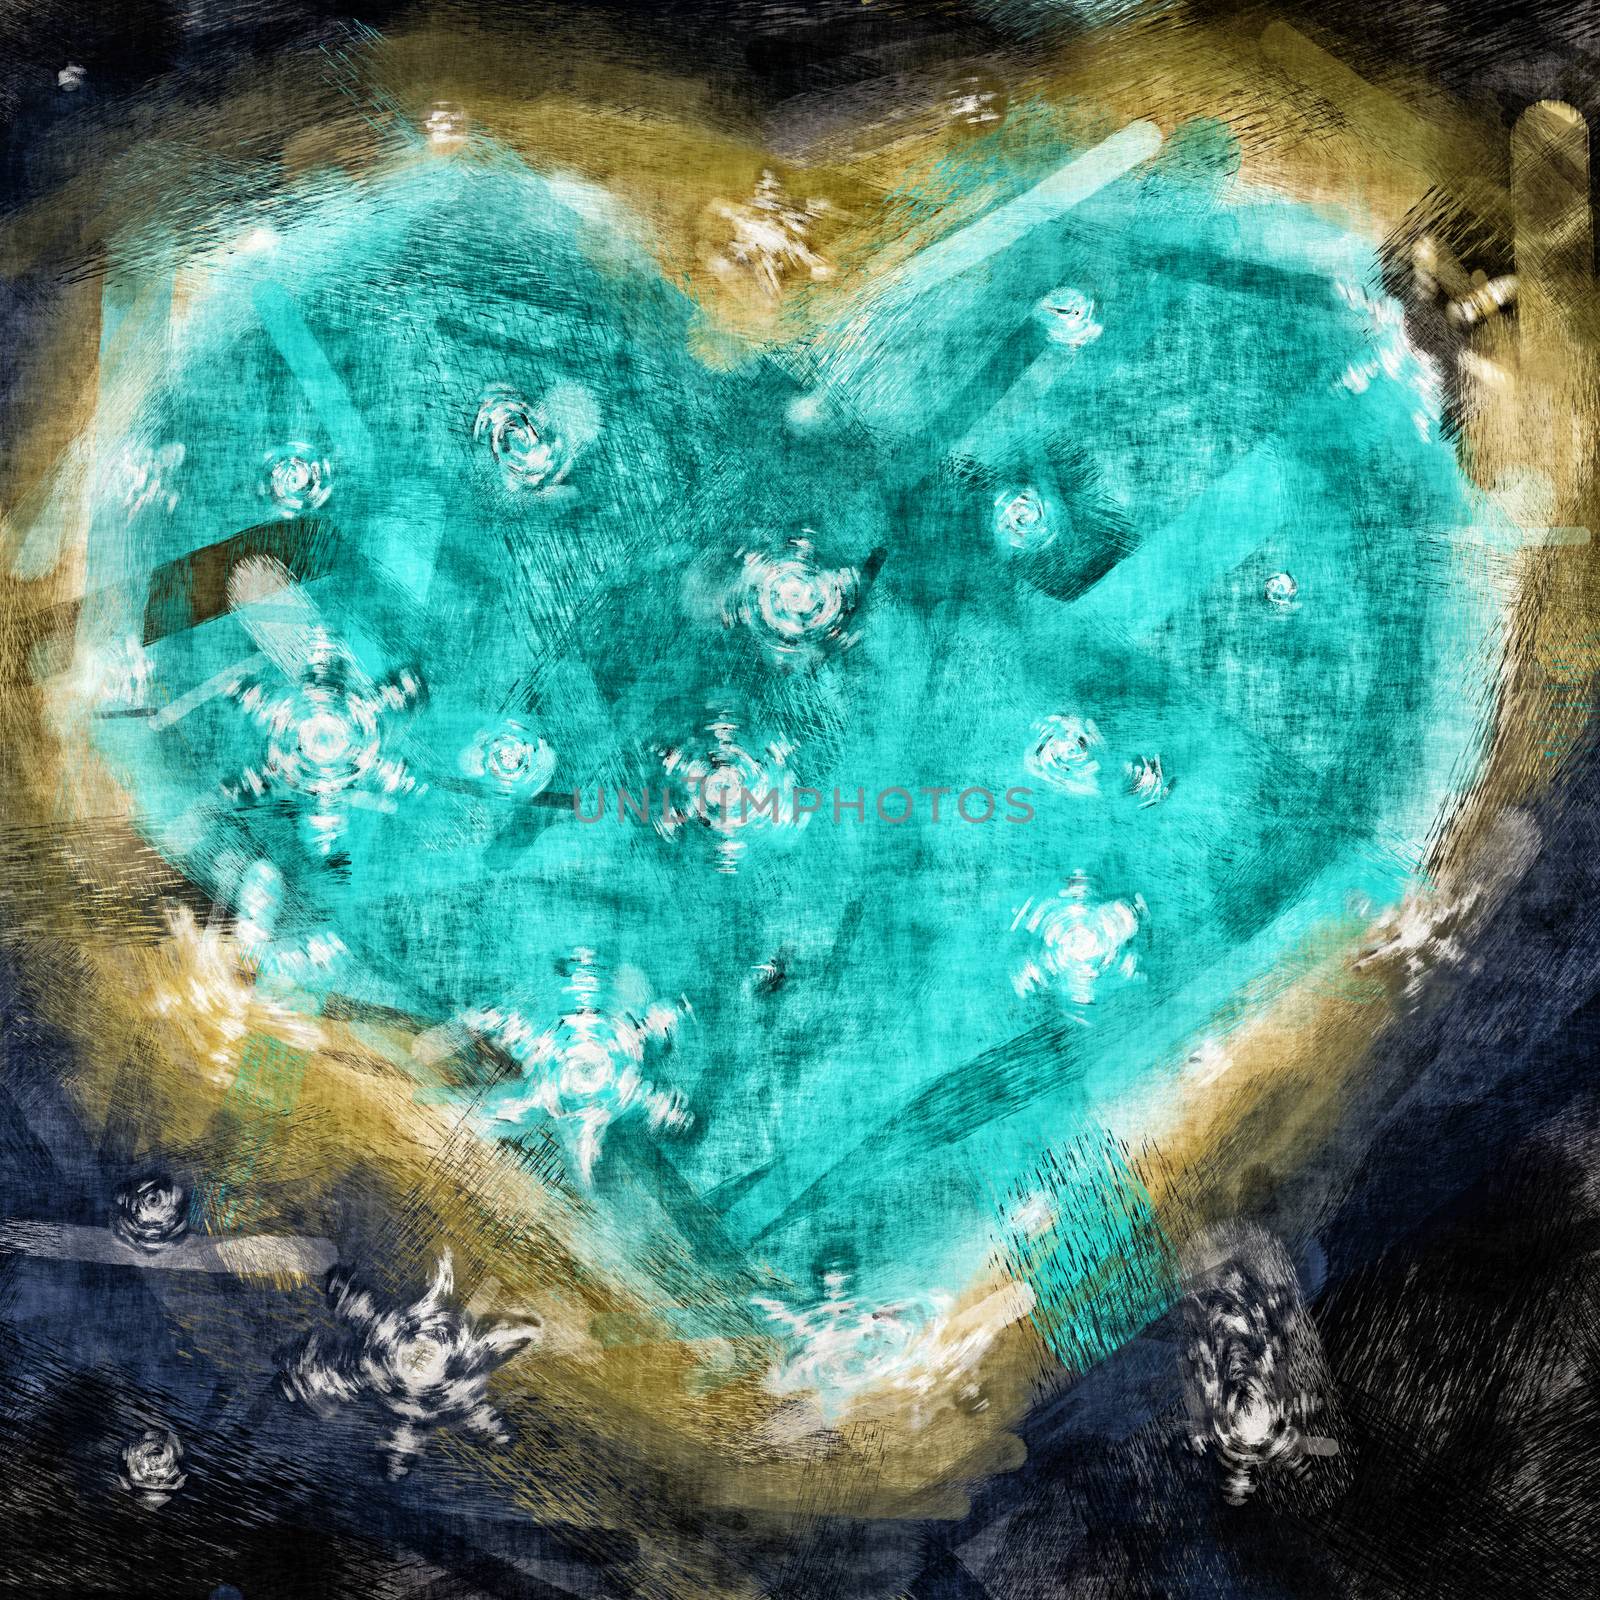 Snow heart by w20er